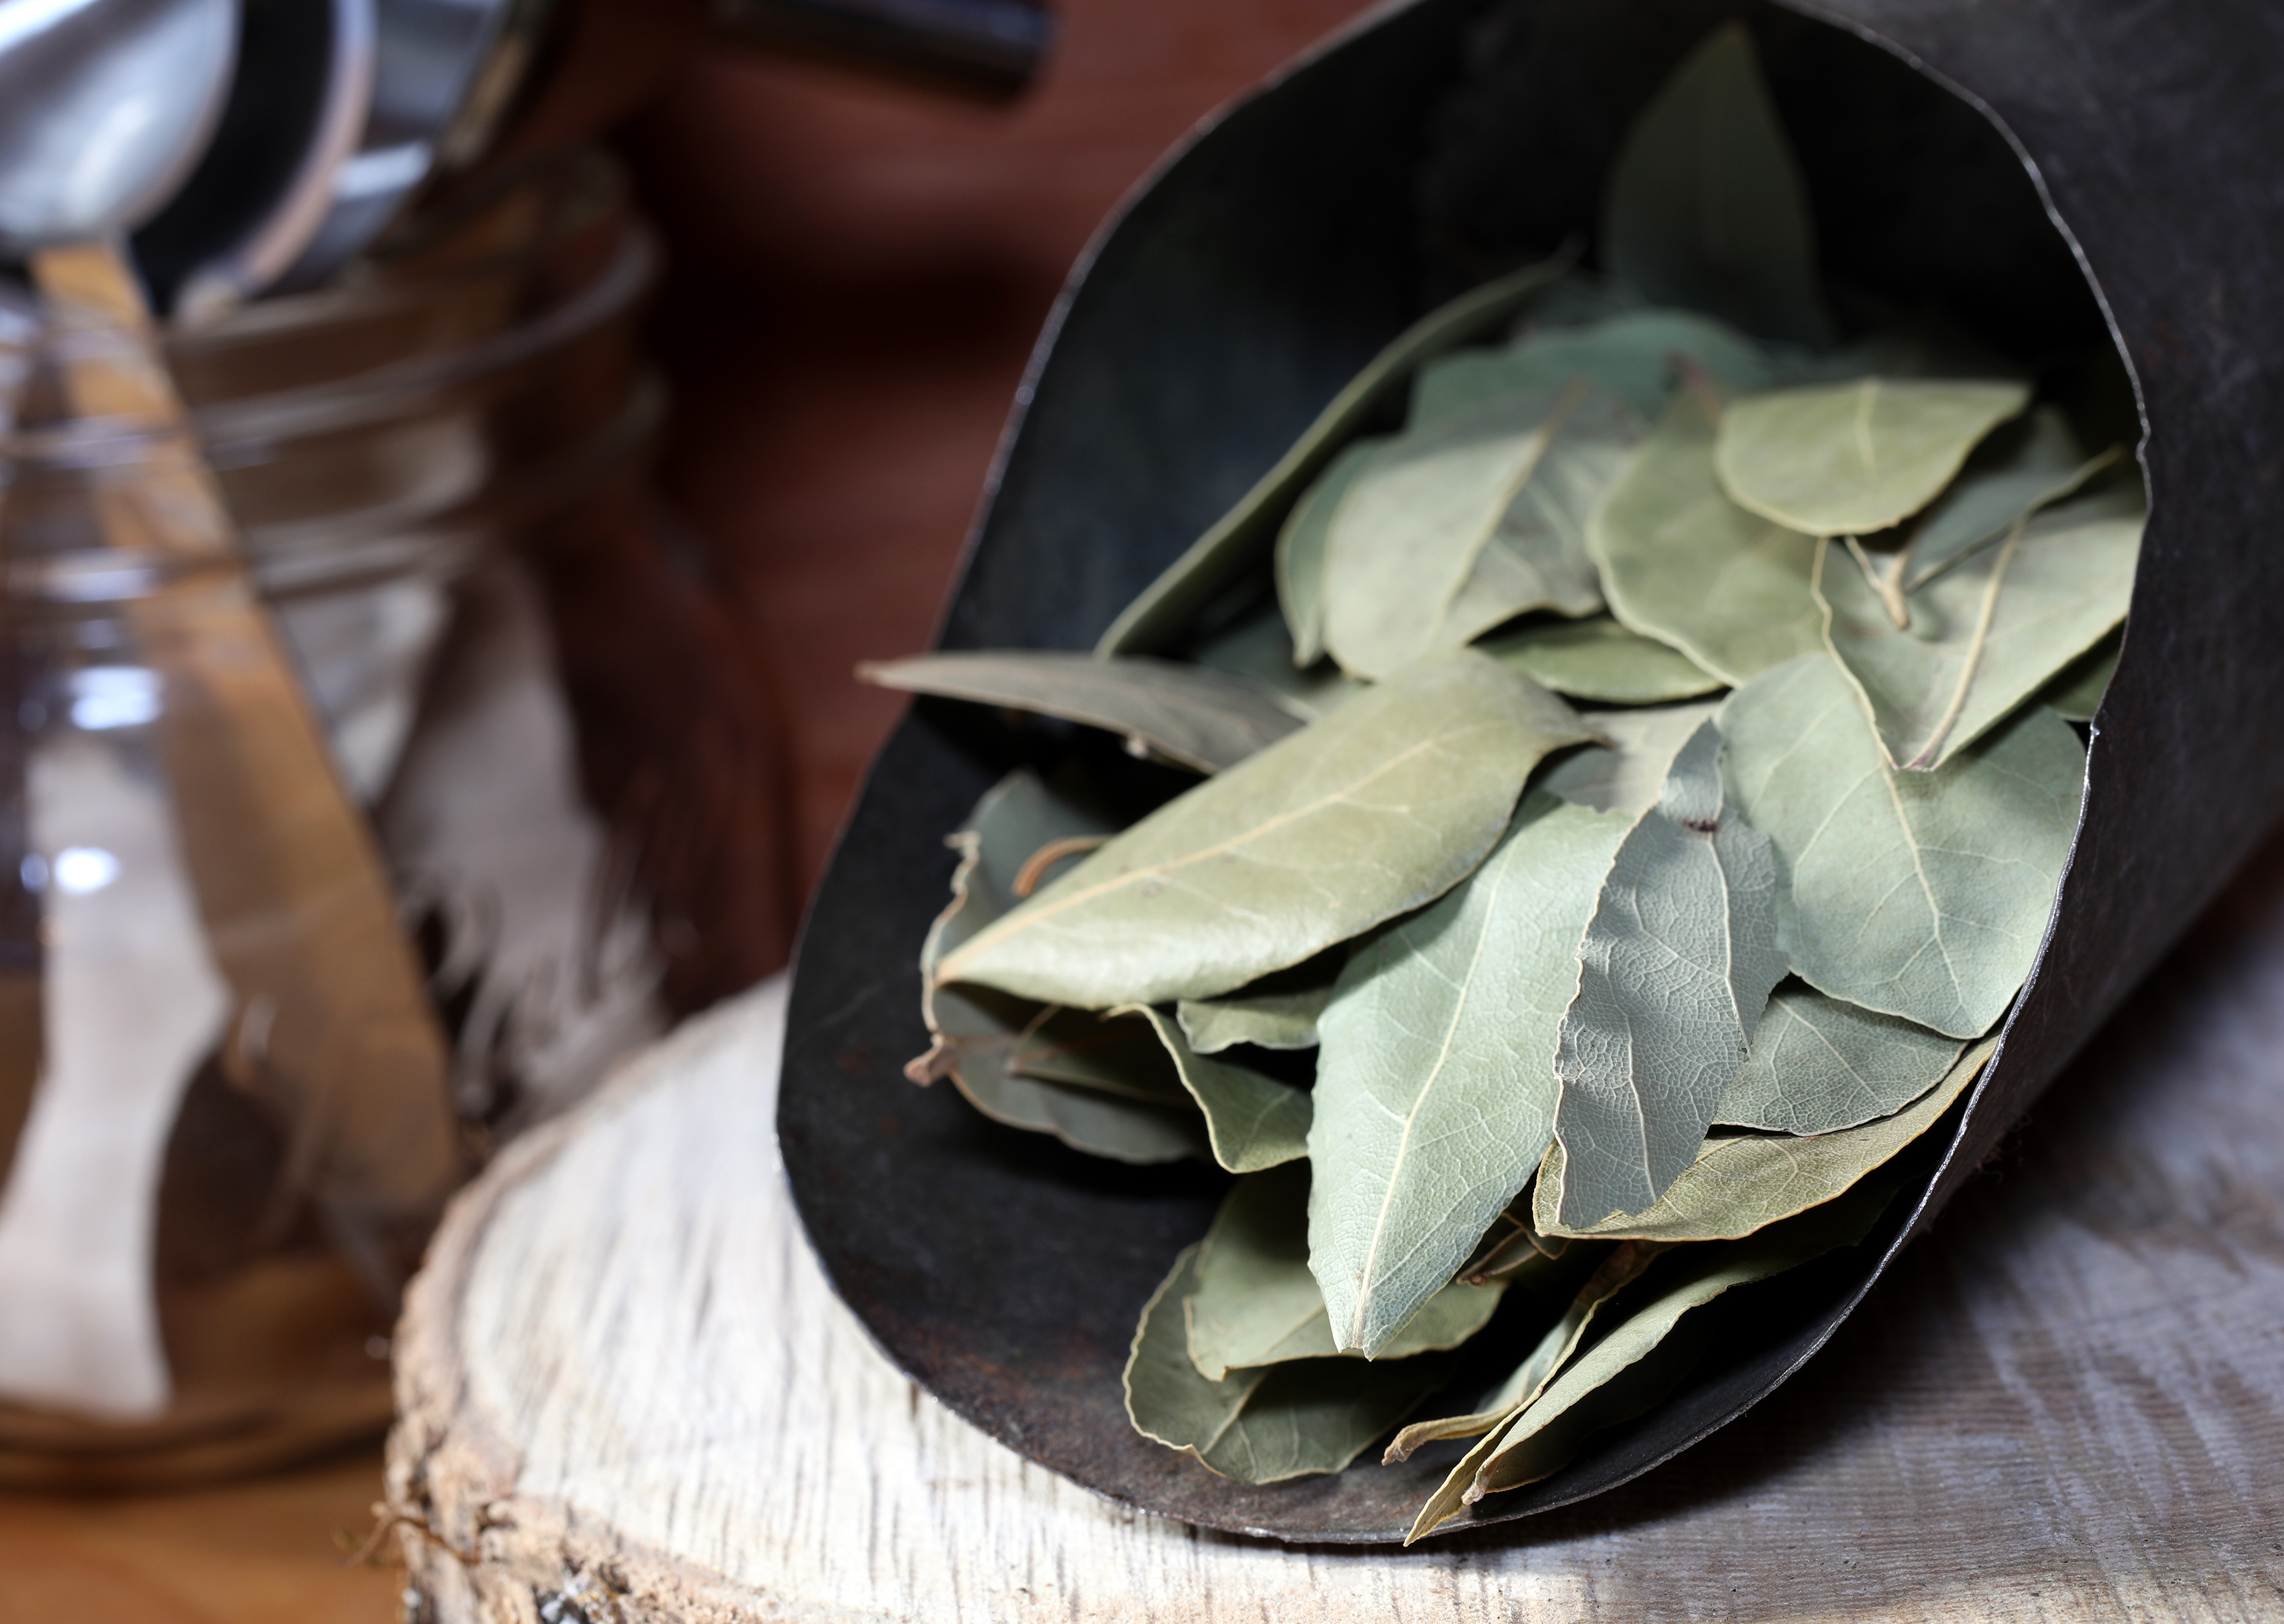 Bay Leaves in herbal apothecary near cooking utensils